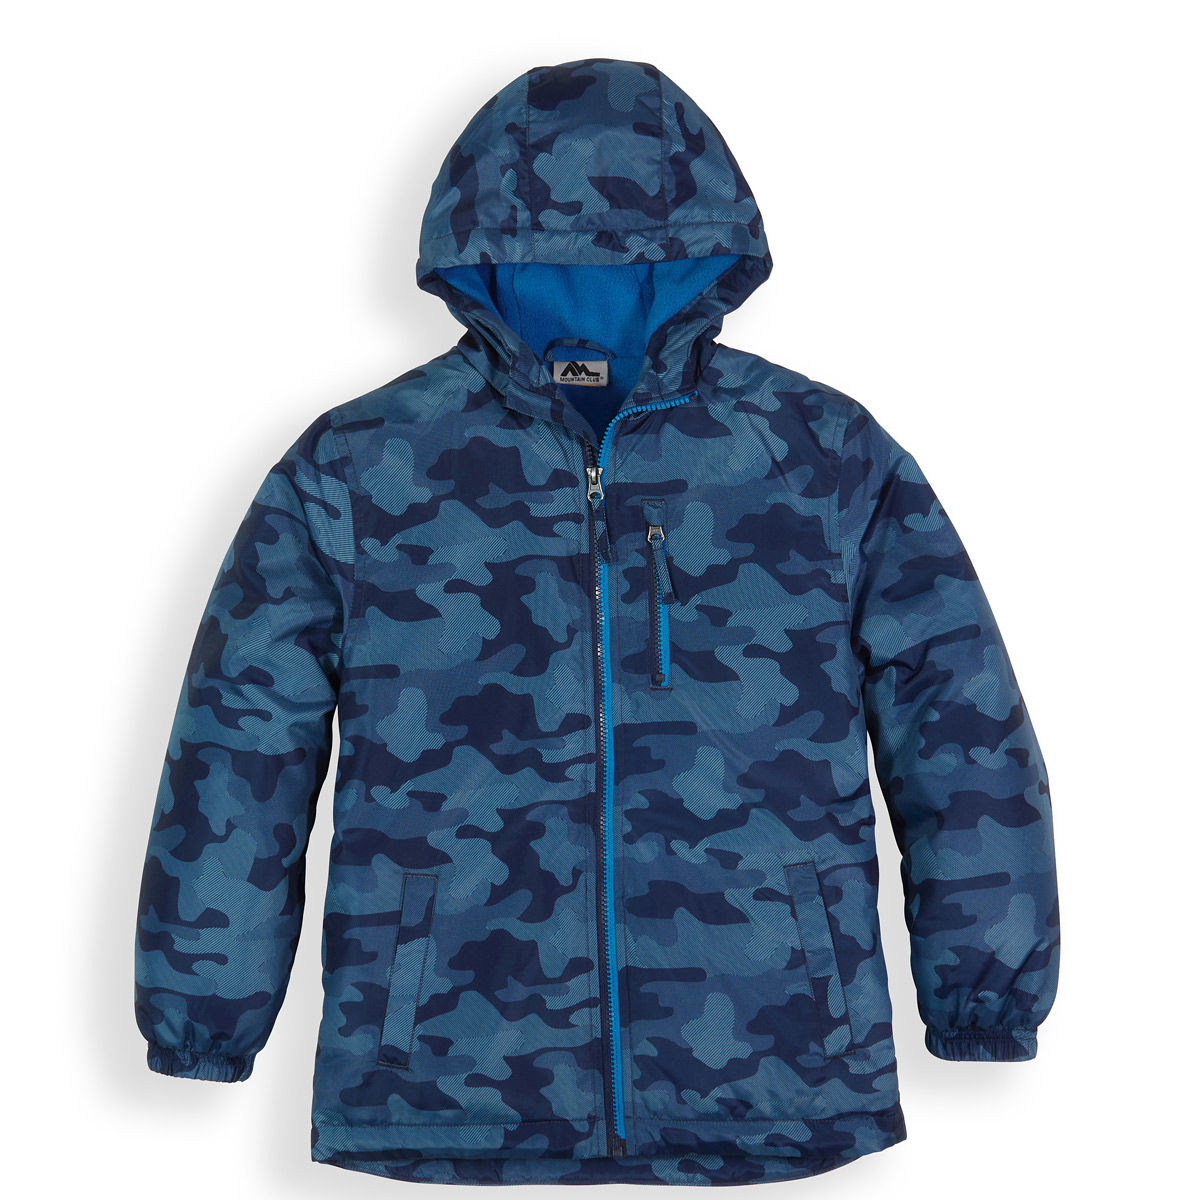 Cheap kids jackets – which is the right one?